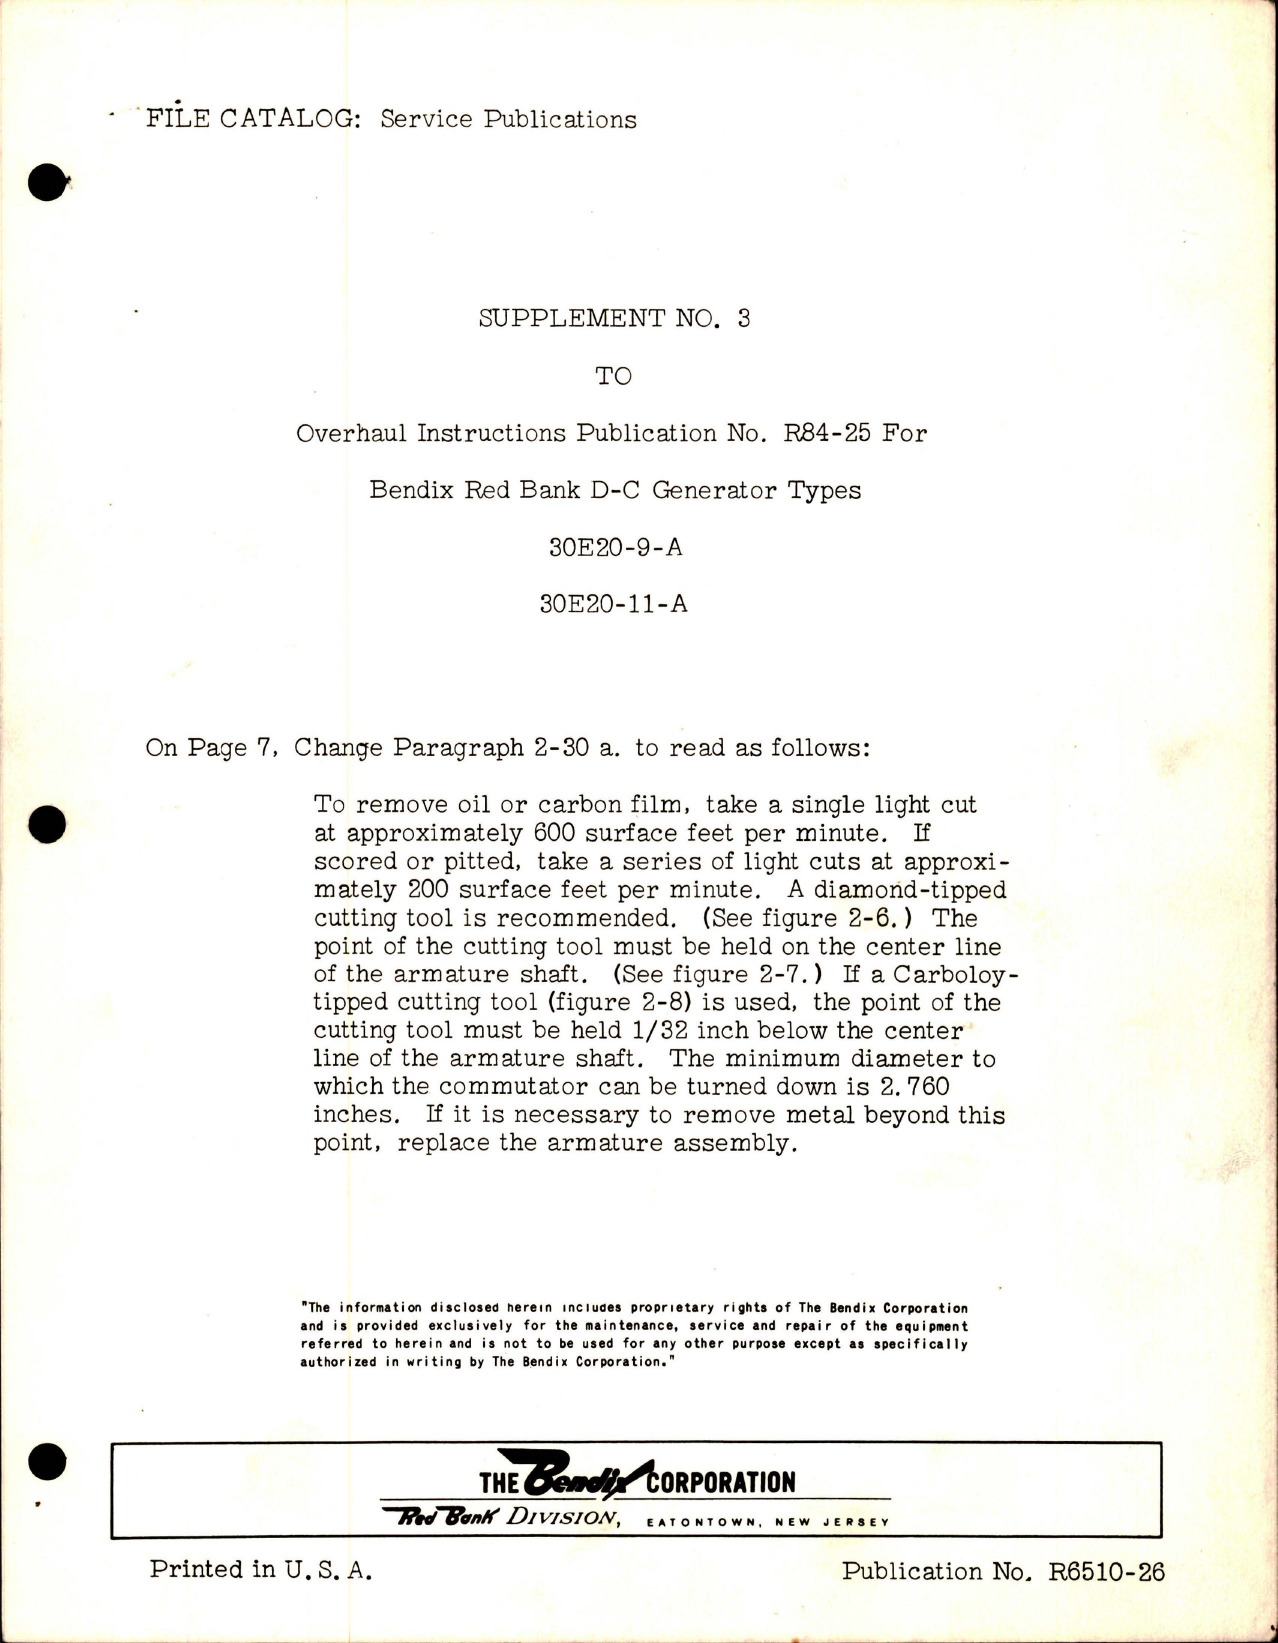 Sample page 1 from AirCorps Library document: Overhaul Instructions (Publication No. R84-25) for Bendix/Red Bank D-C Generator - Type 30E20-9-A and 30E20-11-A